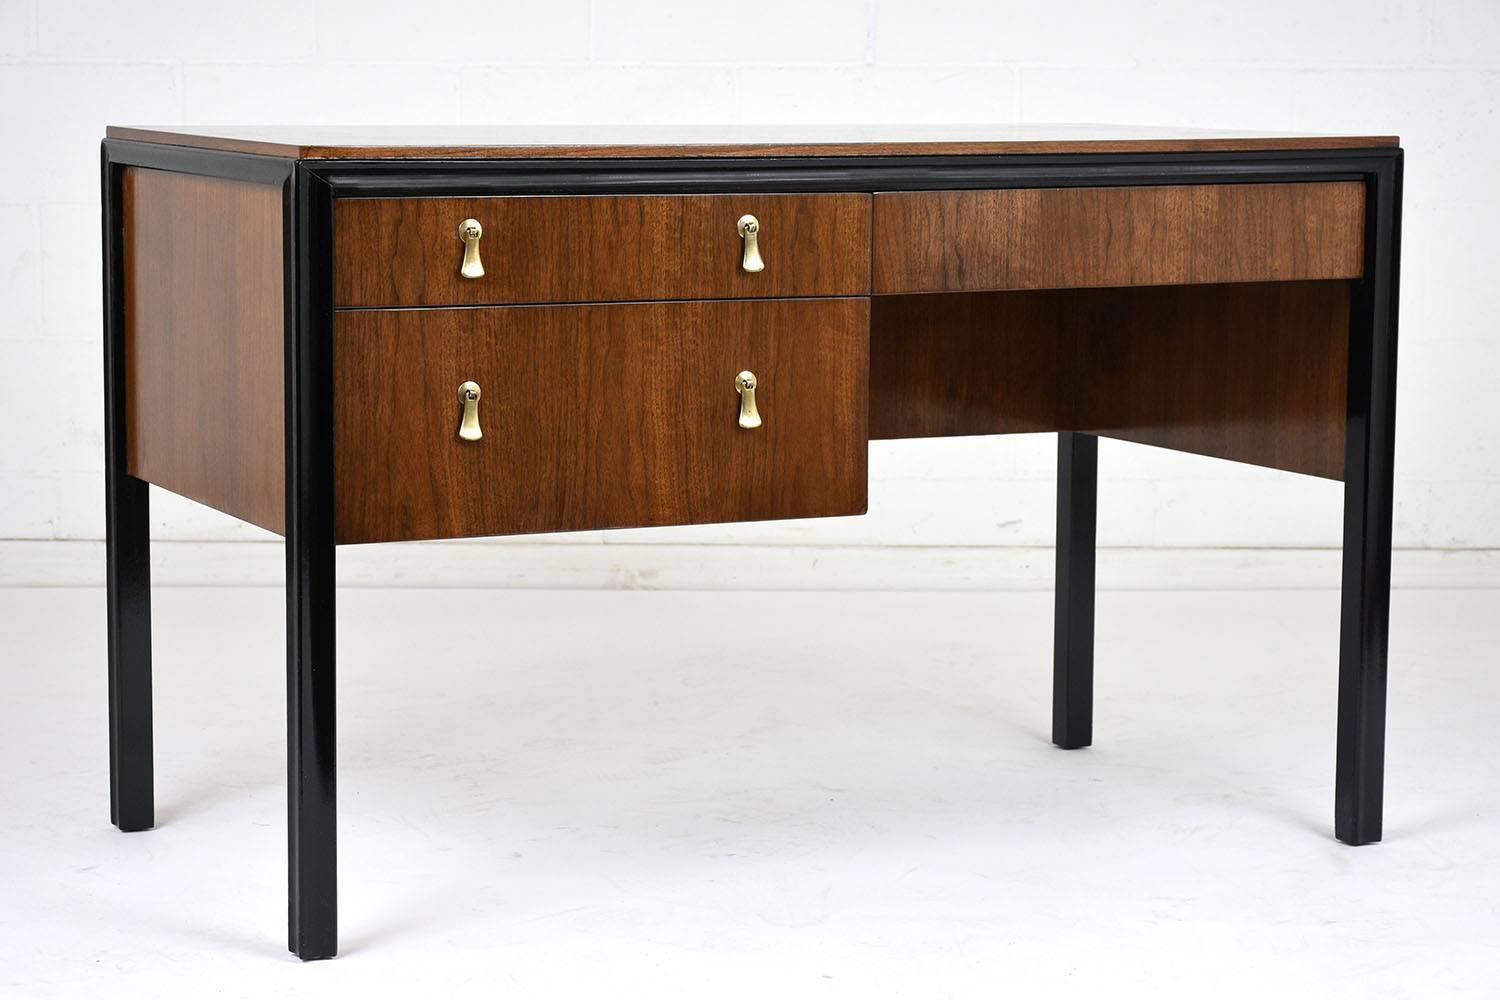 This 1960s Mid-Century Modern style desk has been completely restored and features walnut wood veneers stained in a rich walnut color with a lacquered finish and black details on the corners and legs. There are three drawers with brass drop drawer